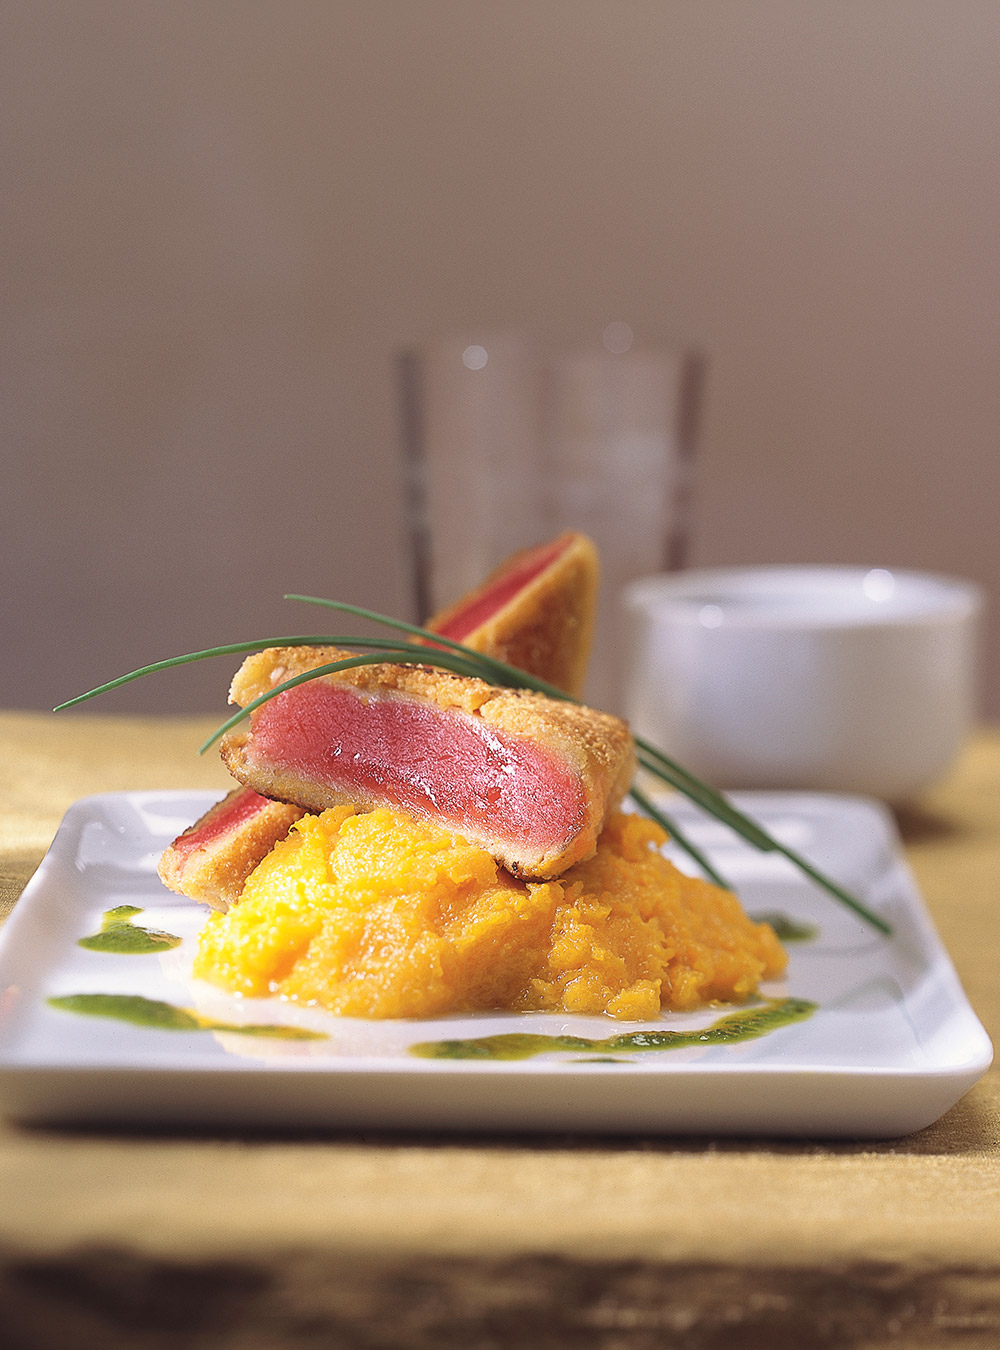 Almond-Crusted Seared Tuna on Mashed Butternut Squash with Ginger